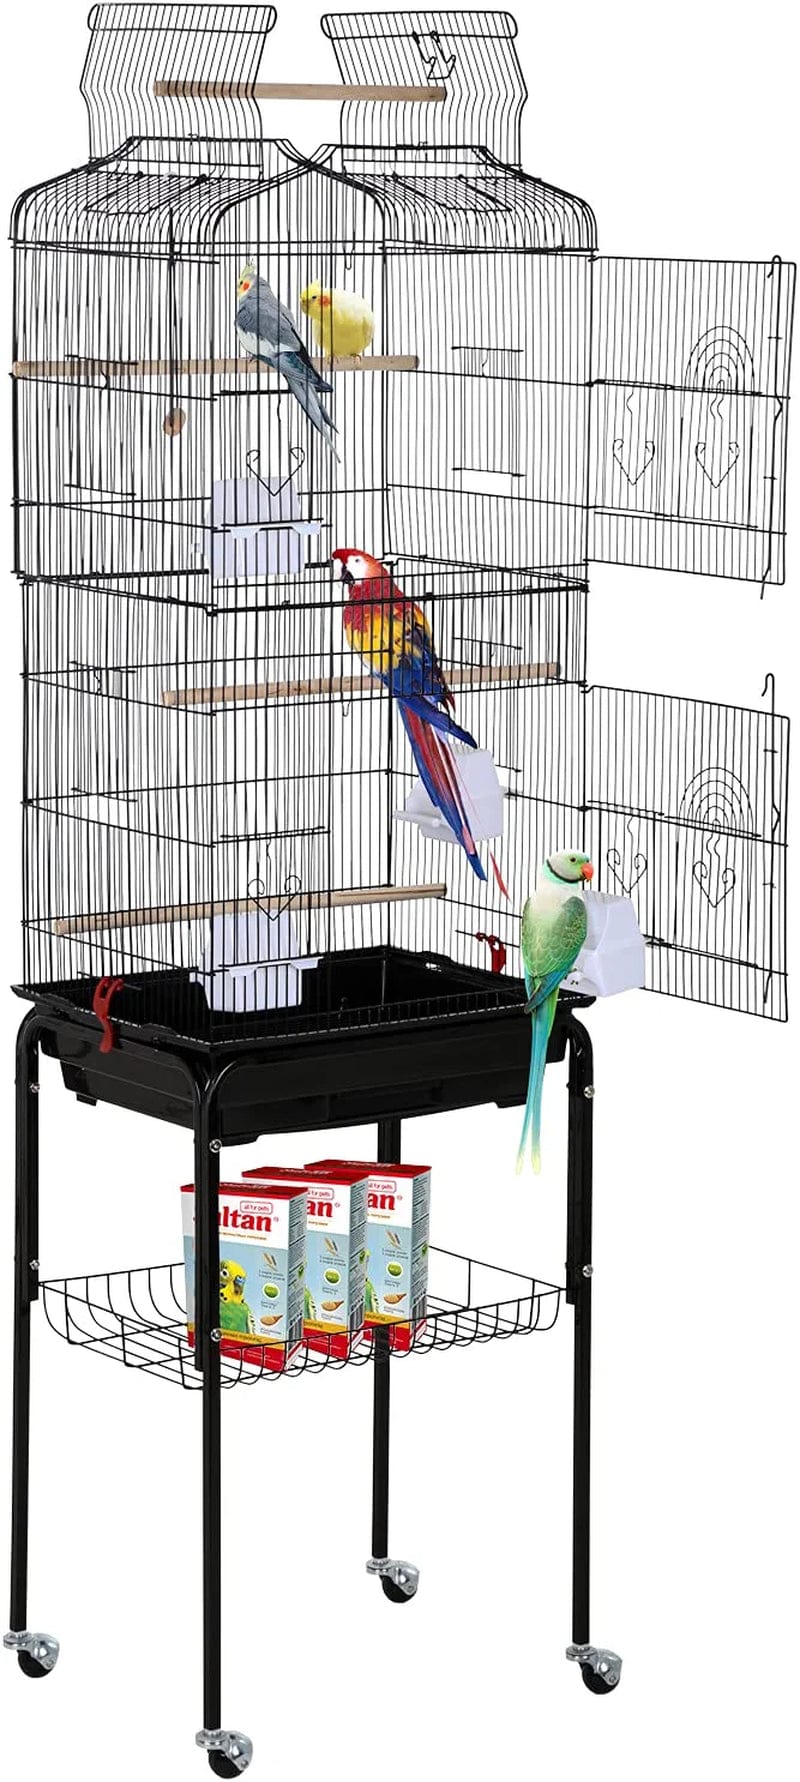 HCY Bird Cage Parakeet 64 Inch Open Top Standing Parrot Accessories with Rolling Stand for Medium Small Cockatiel Canary Conure Finches Budgie Lovebirds Pet Storage Shelf, Black, 64X13X17 (Pack of 1) Animals & Pet Supplies > Pet Supplies > Bird Supplies > Bird Cages & Stands HCY Black  